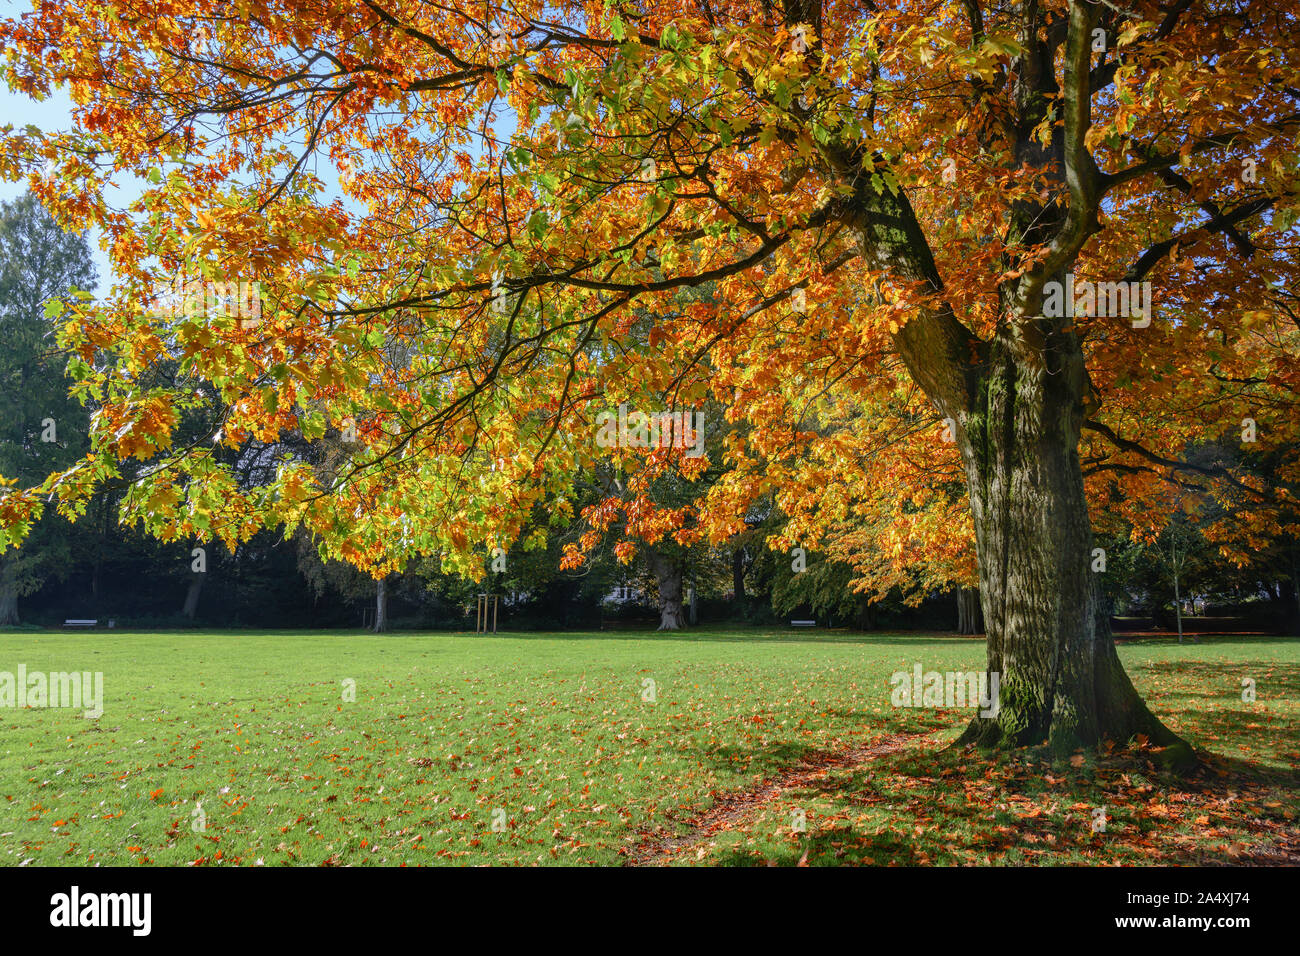 old northern red oak tree (Quercus rubra) with colorful autumn leaves in a park, seasonal landscape, copy space Stock Photo